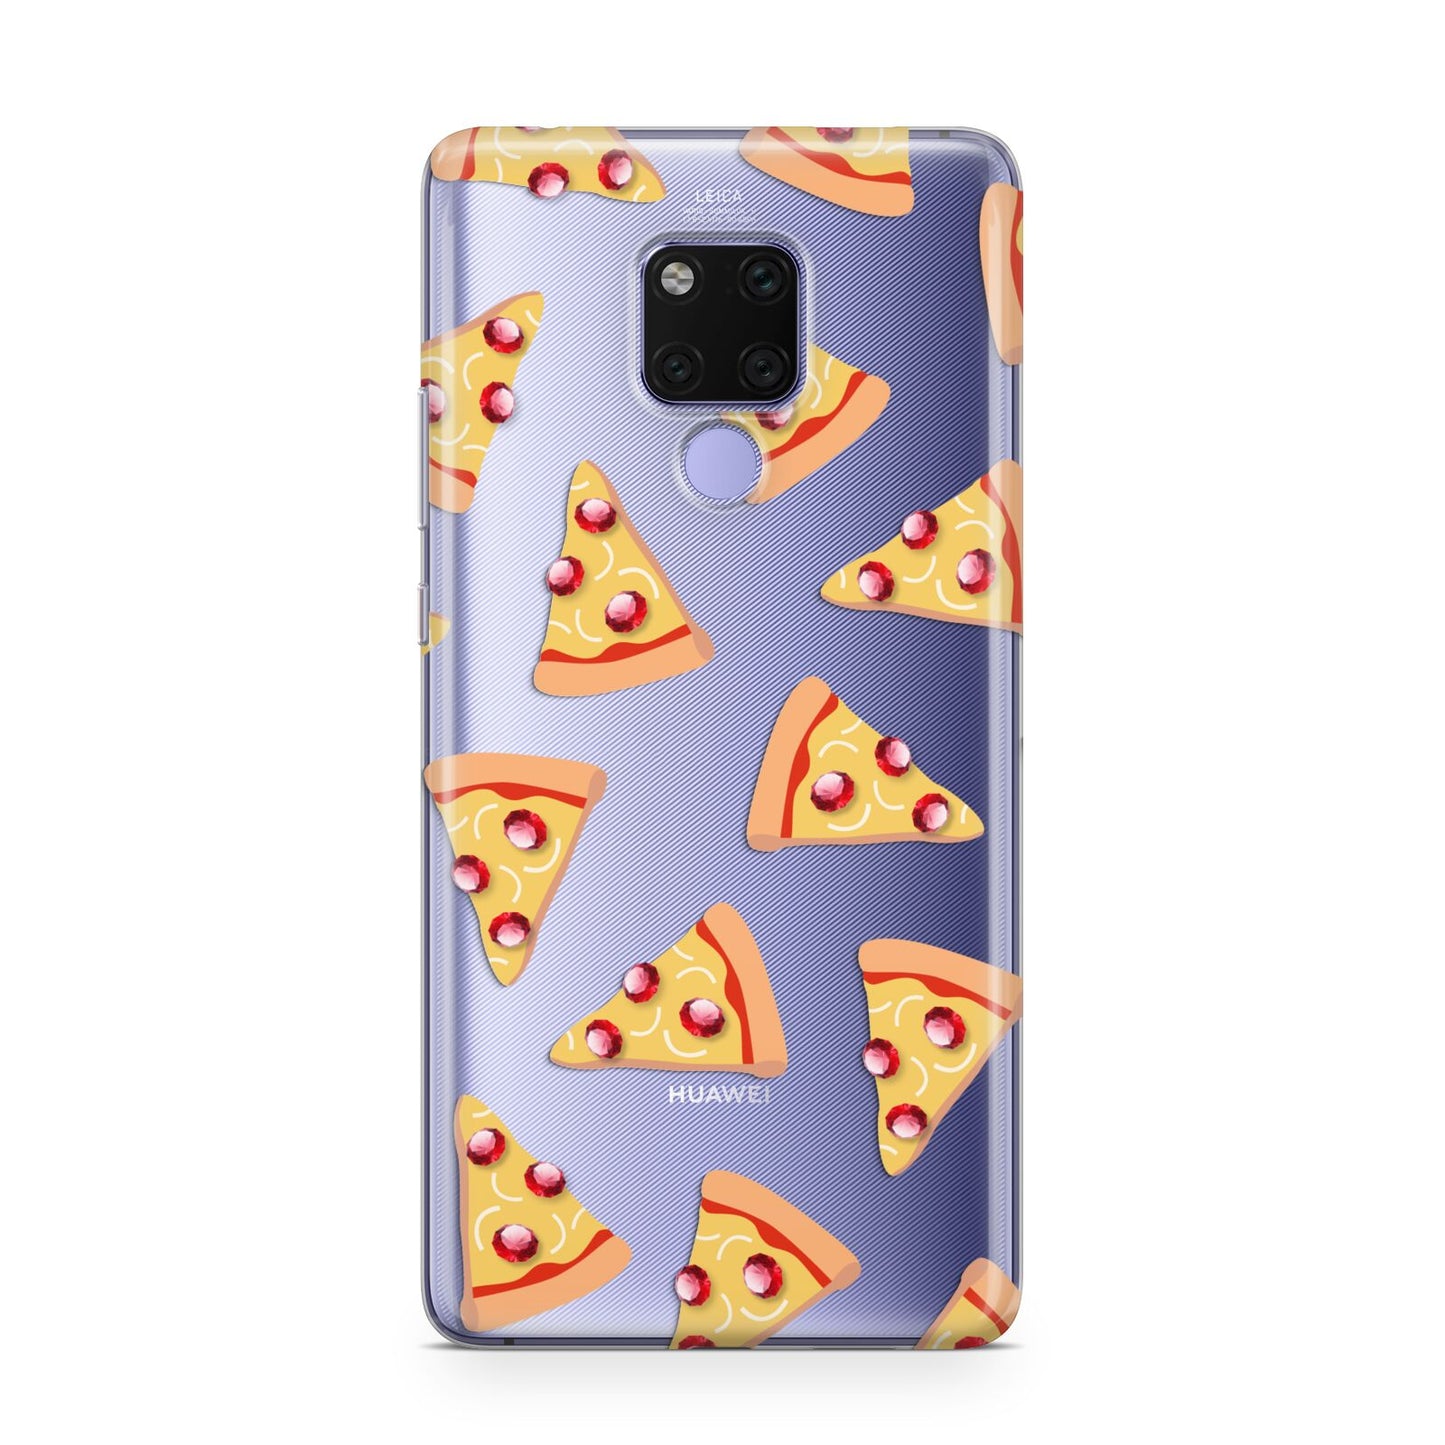 Rubies on Cartoon Pizza Slices Huawei Mate 20X Phone Case